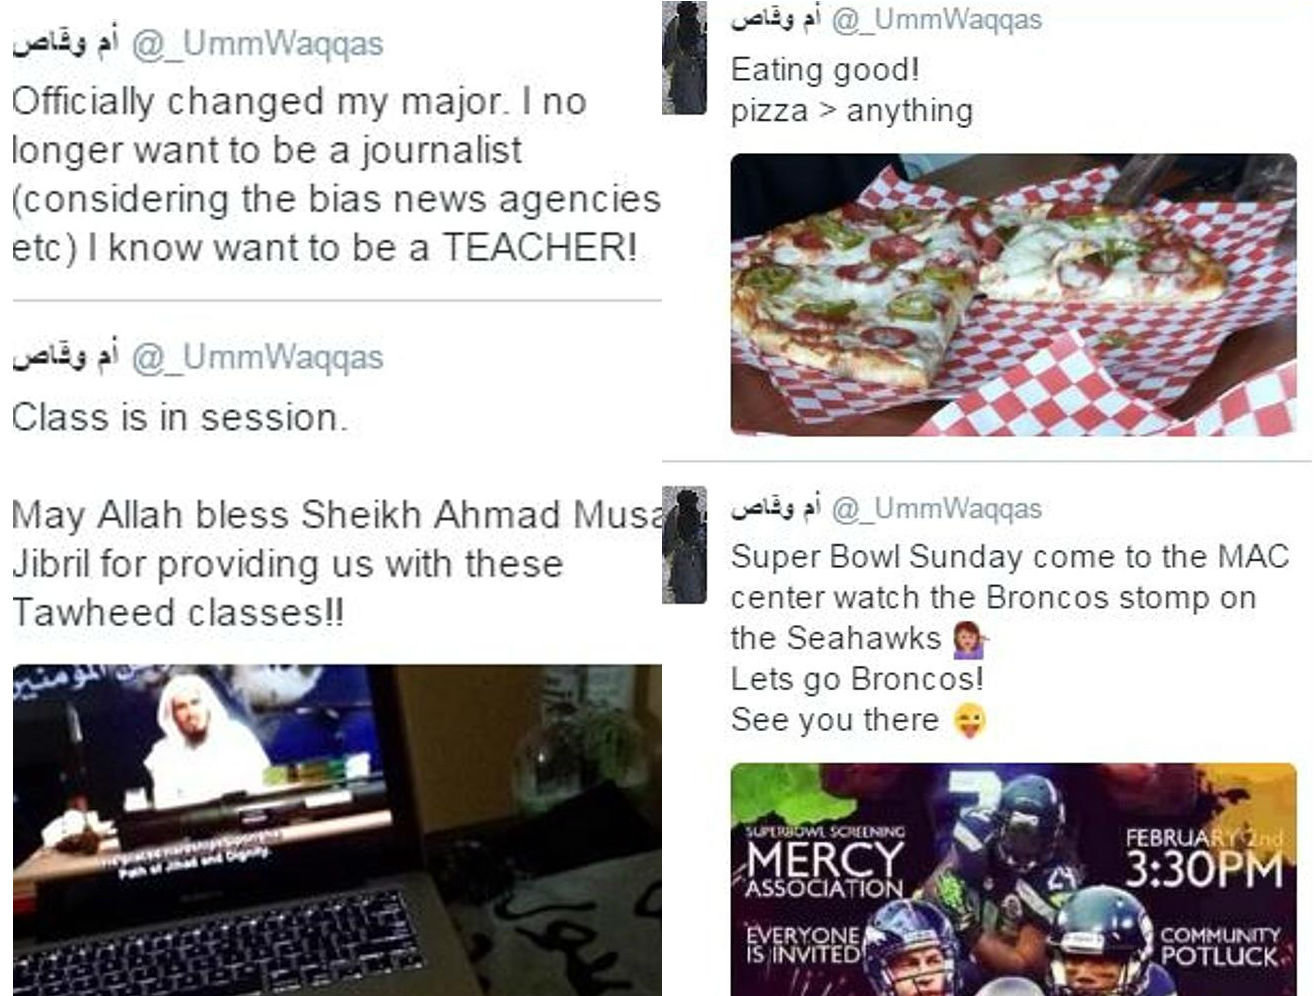 Some of the tweets on @_UmmWaqqas' account reflected her interest in extremist lectures, her disenchantment with her journalism studies, and her excitement over Denver Broncos football.